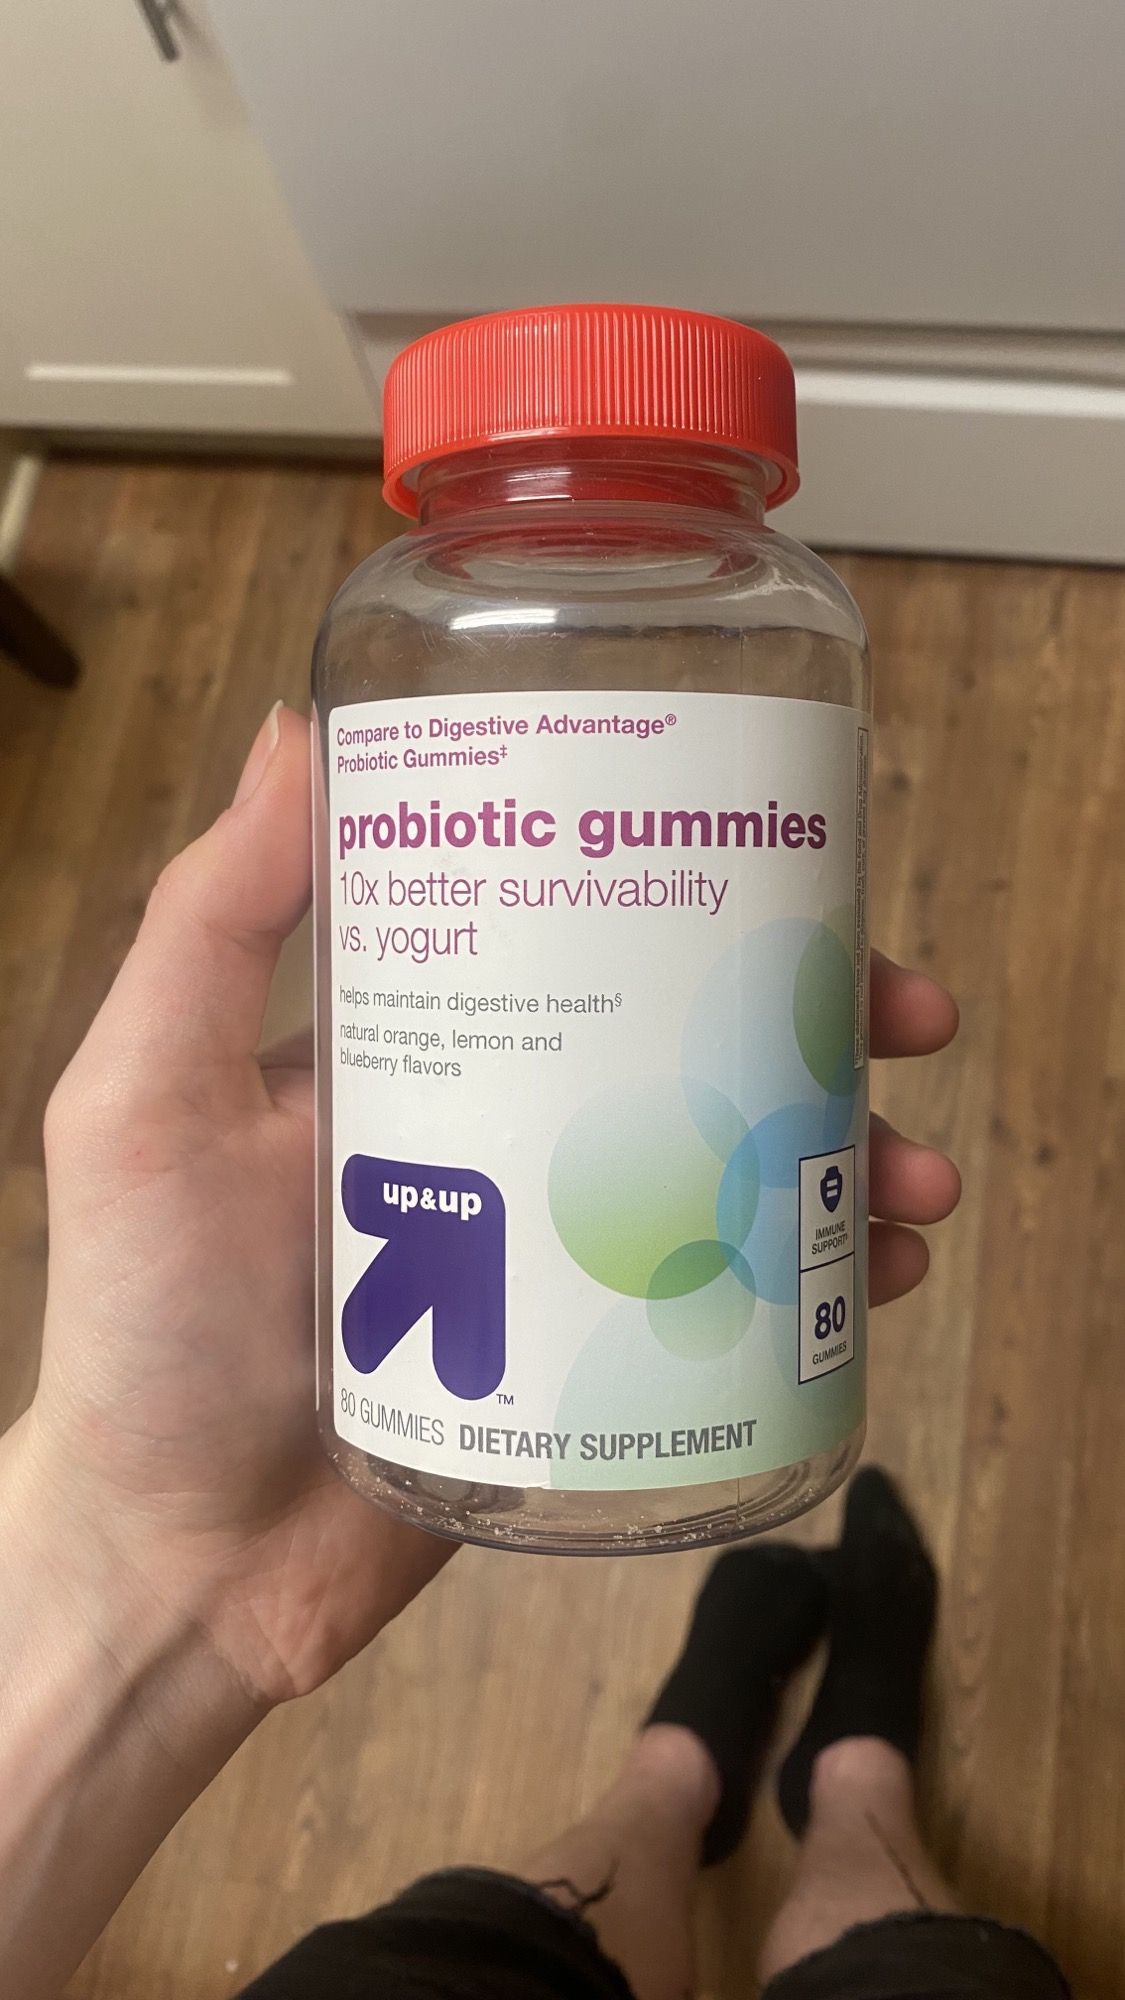 My wife’s vitamins increase her survivability chances in a fight against yogurt by 10!